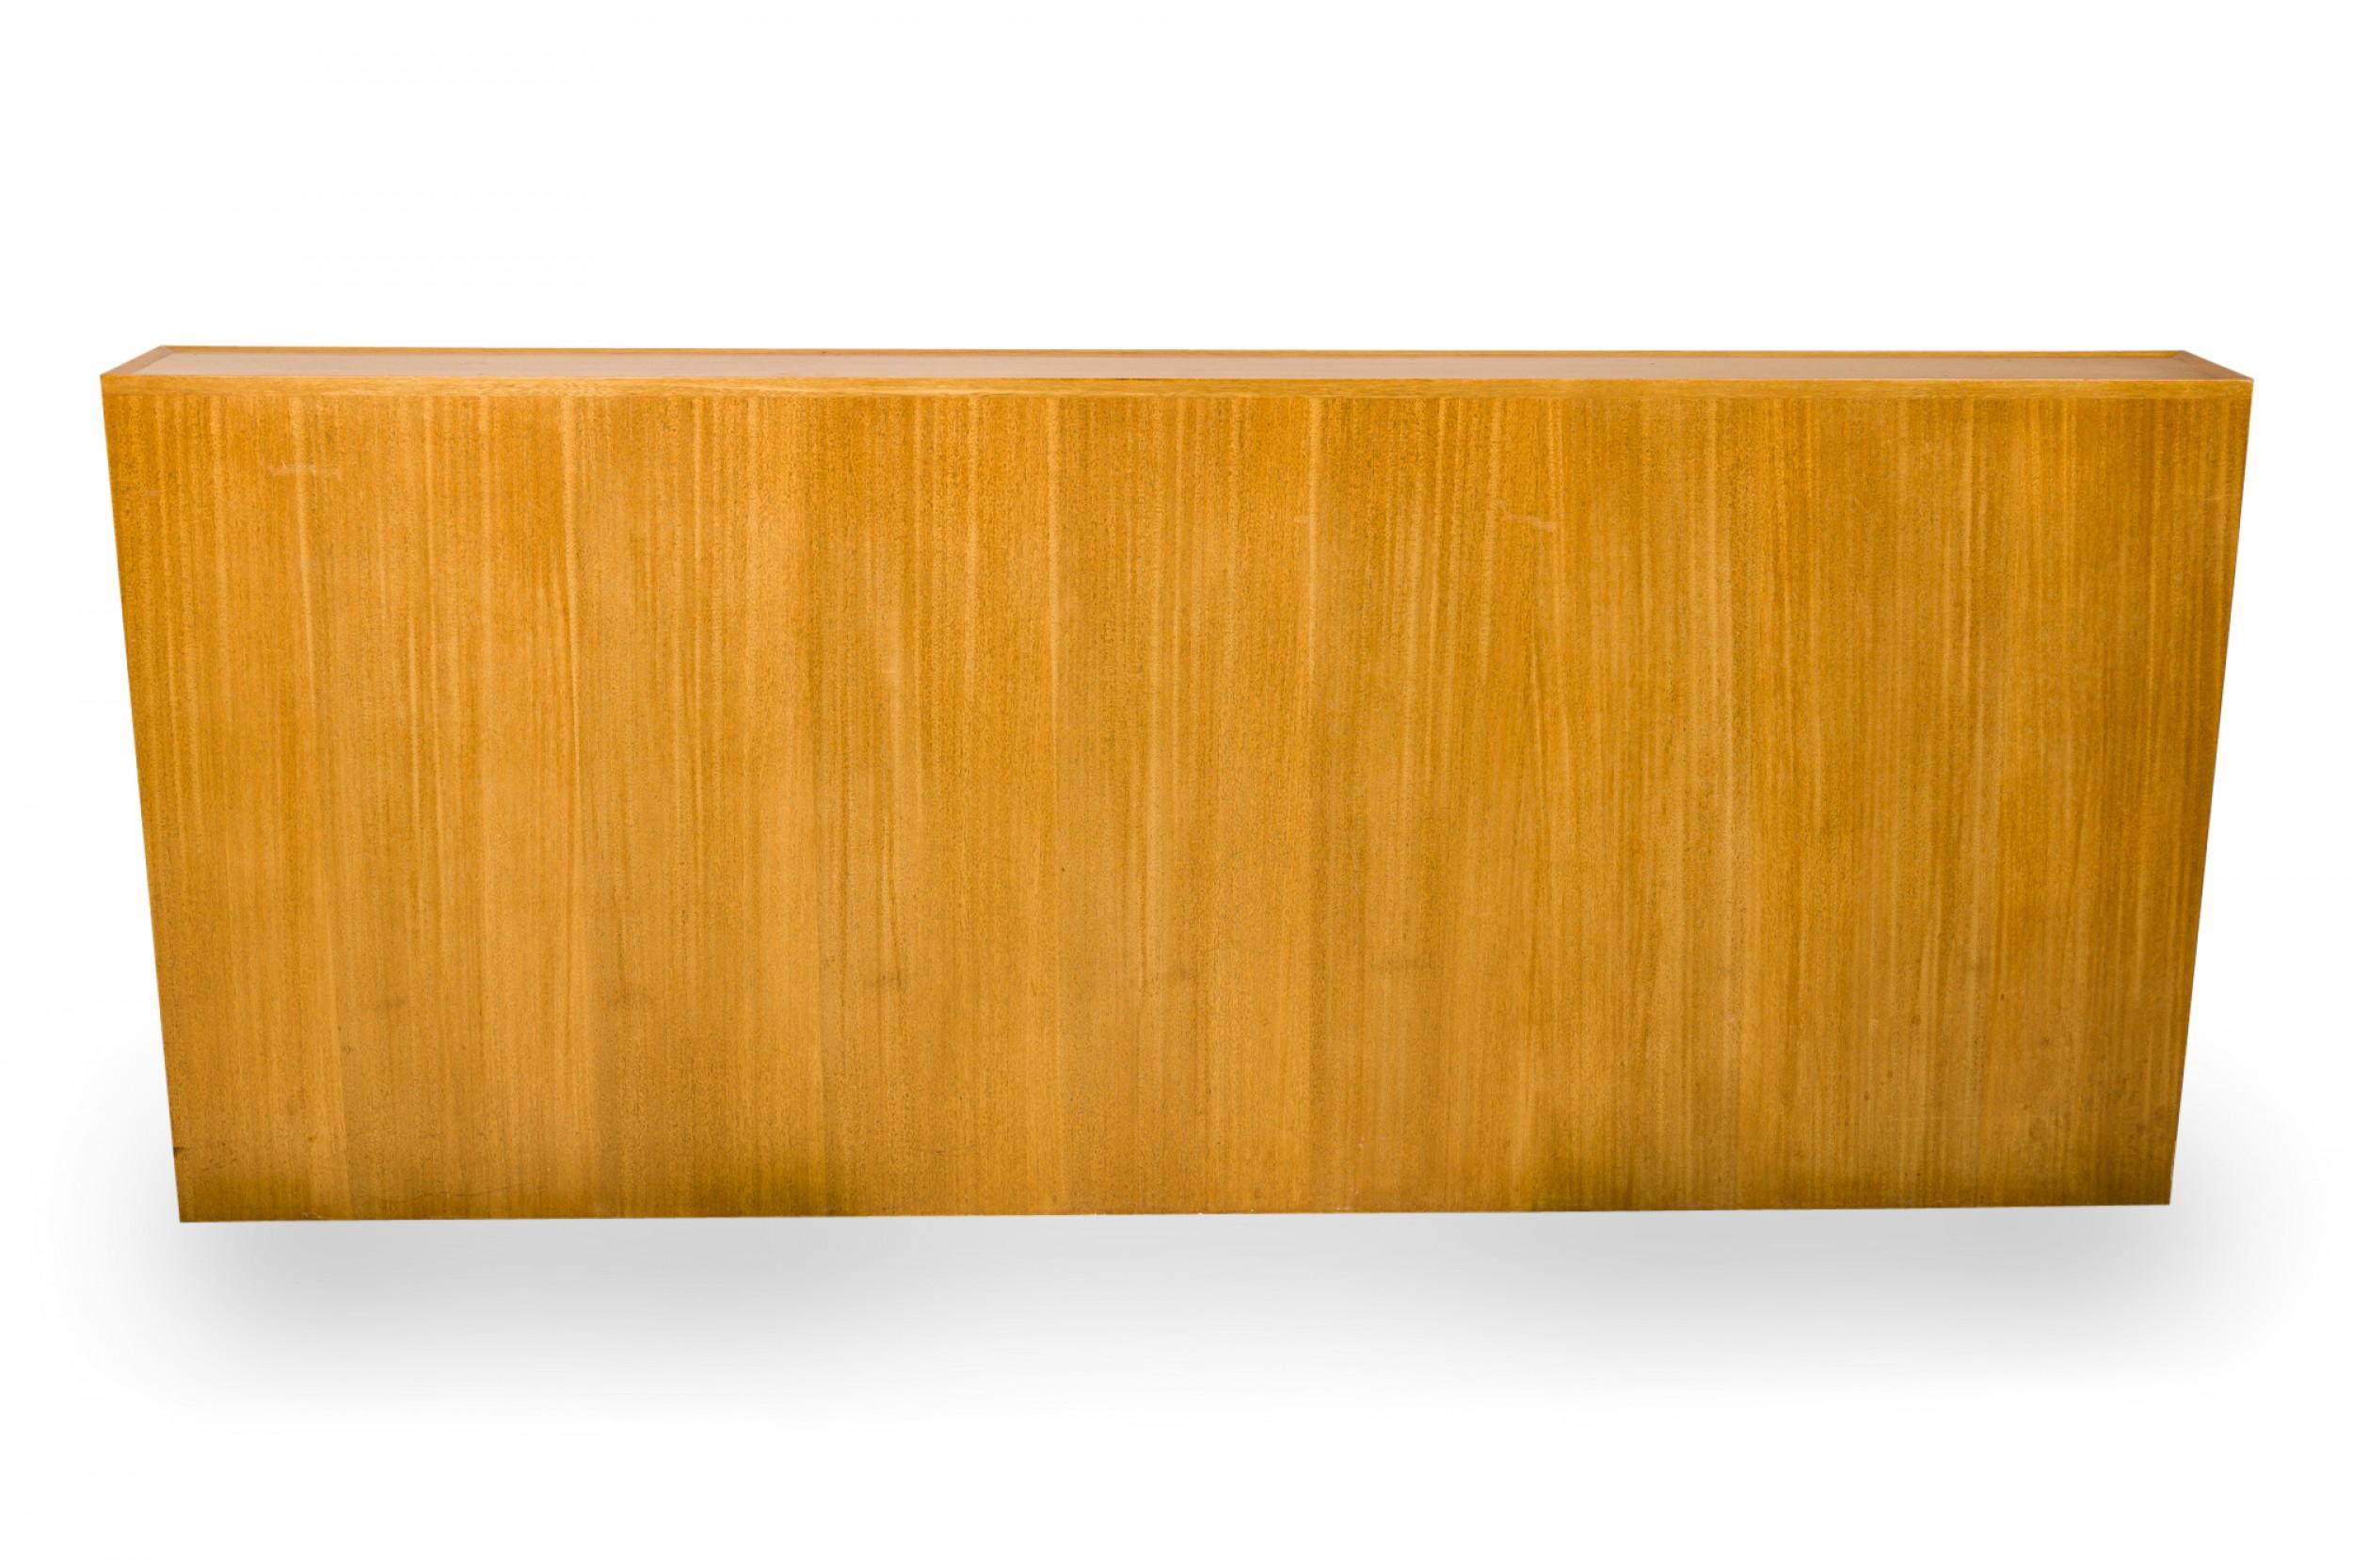 Edward Wormley for Dunbar Queen Size Wooden Storage Headboard In Good Condition For Sale In New York, NY